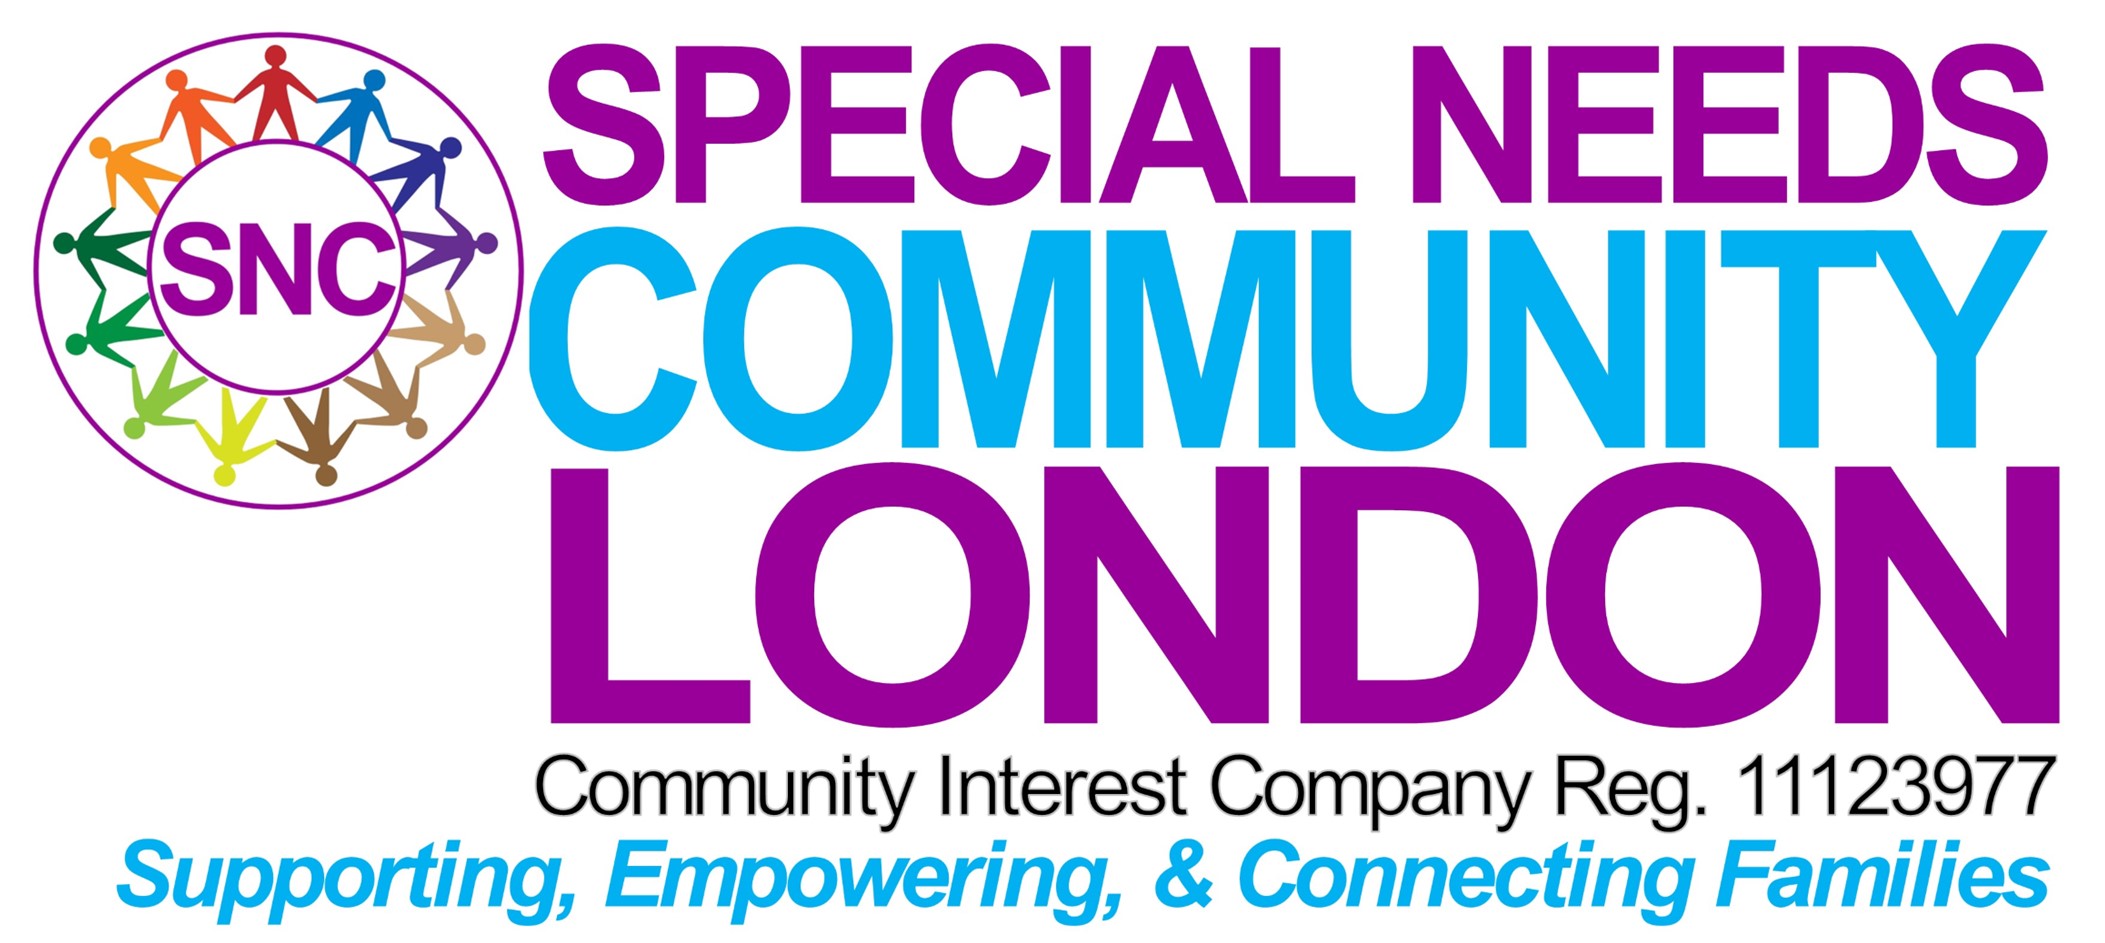 Special Needs Community London 